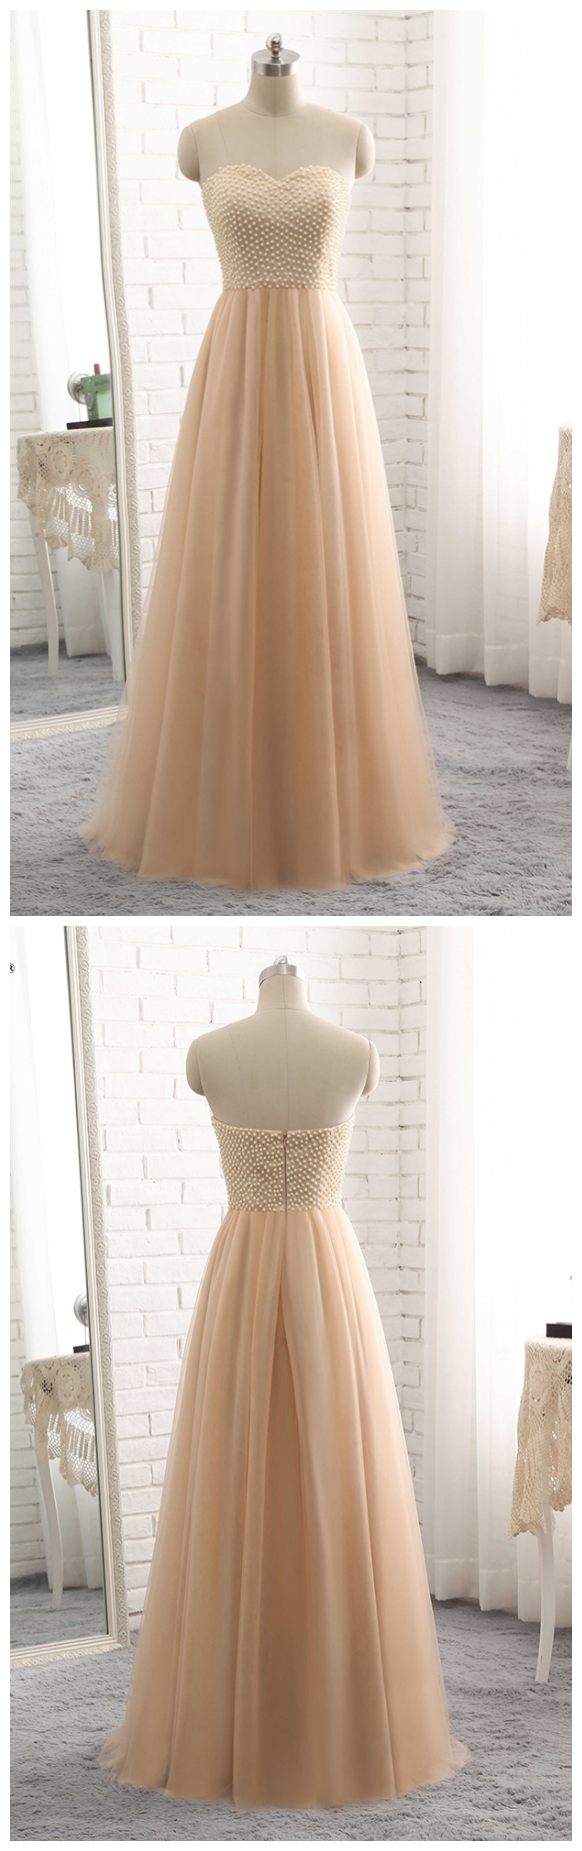 Champagne Long Formal Evening Dress , Pearls Top A Line Prom Dress Robe De Soiree